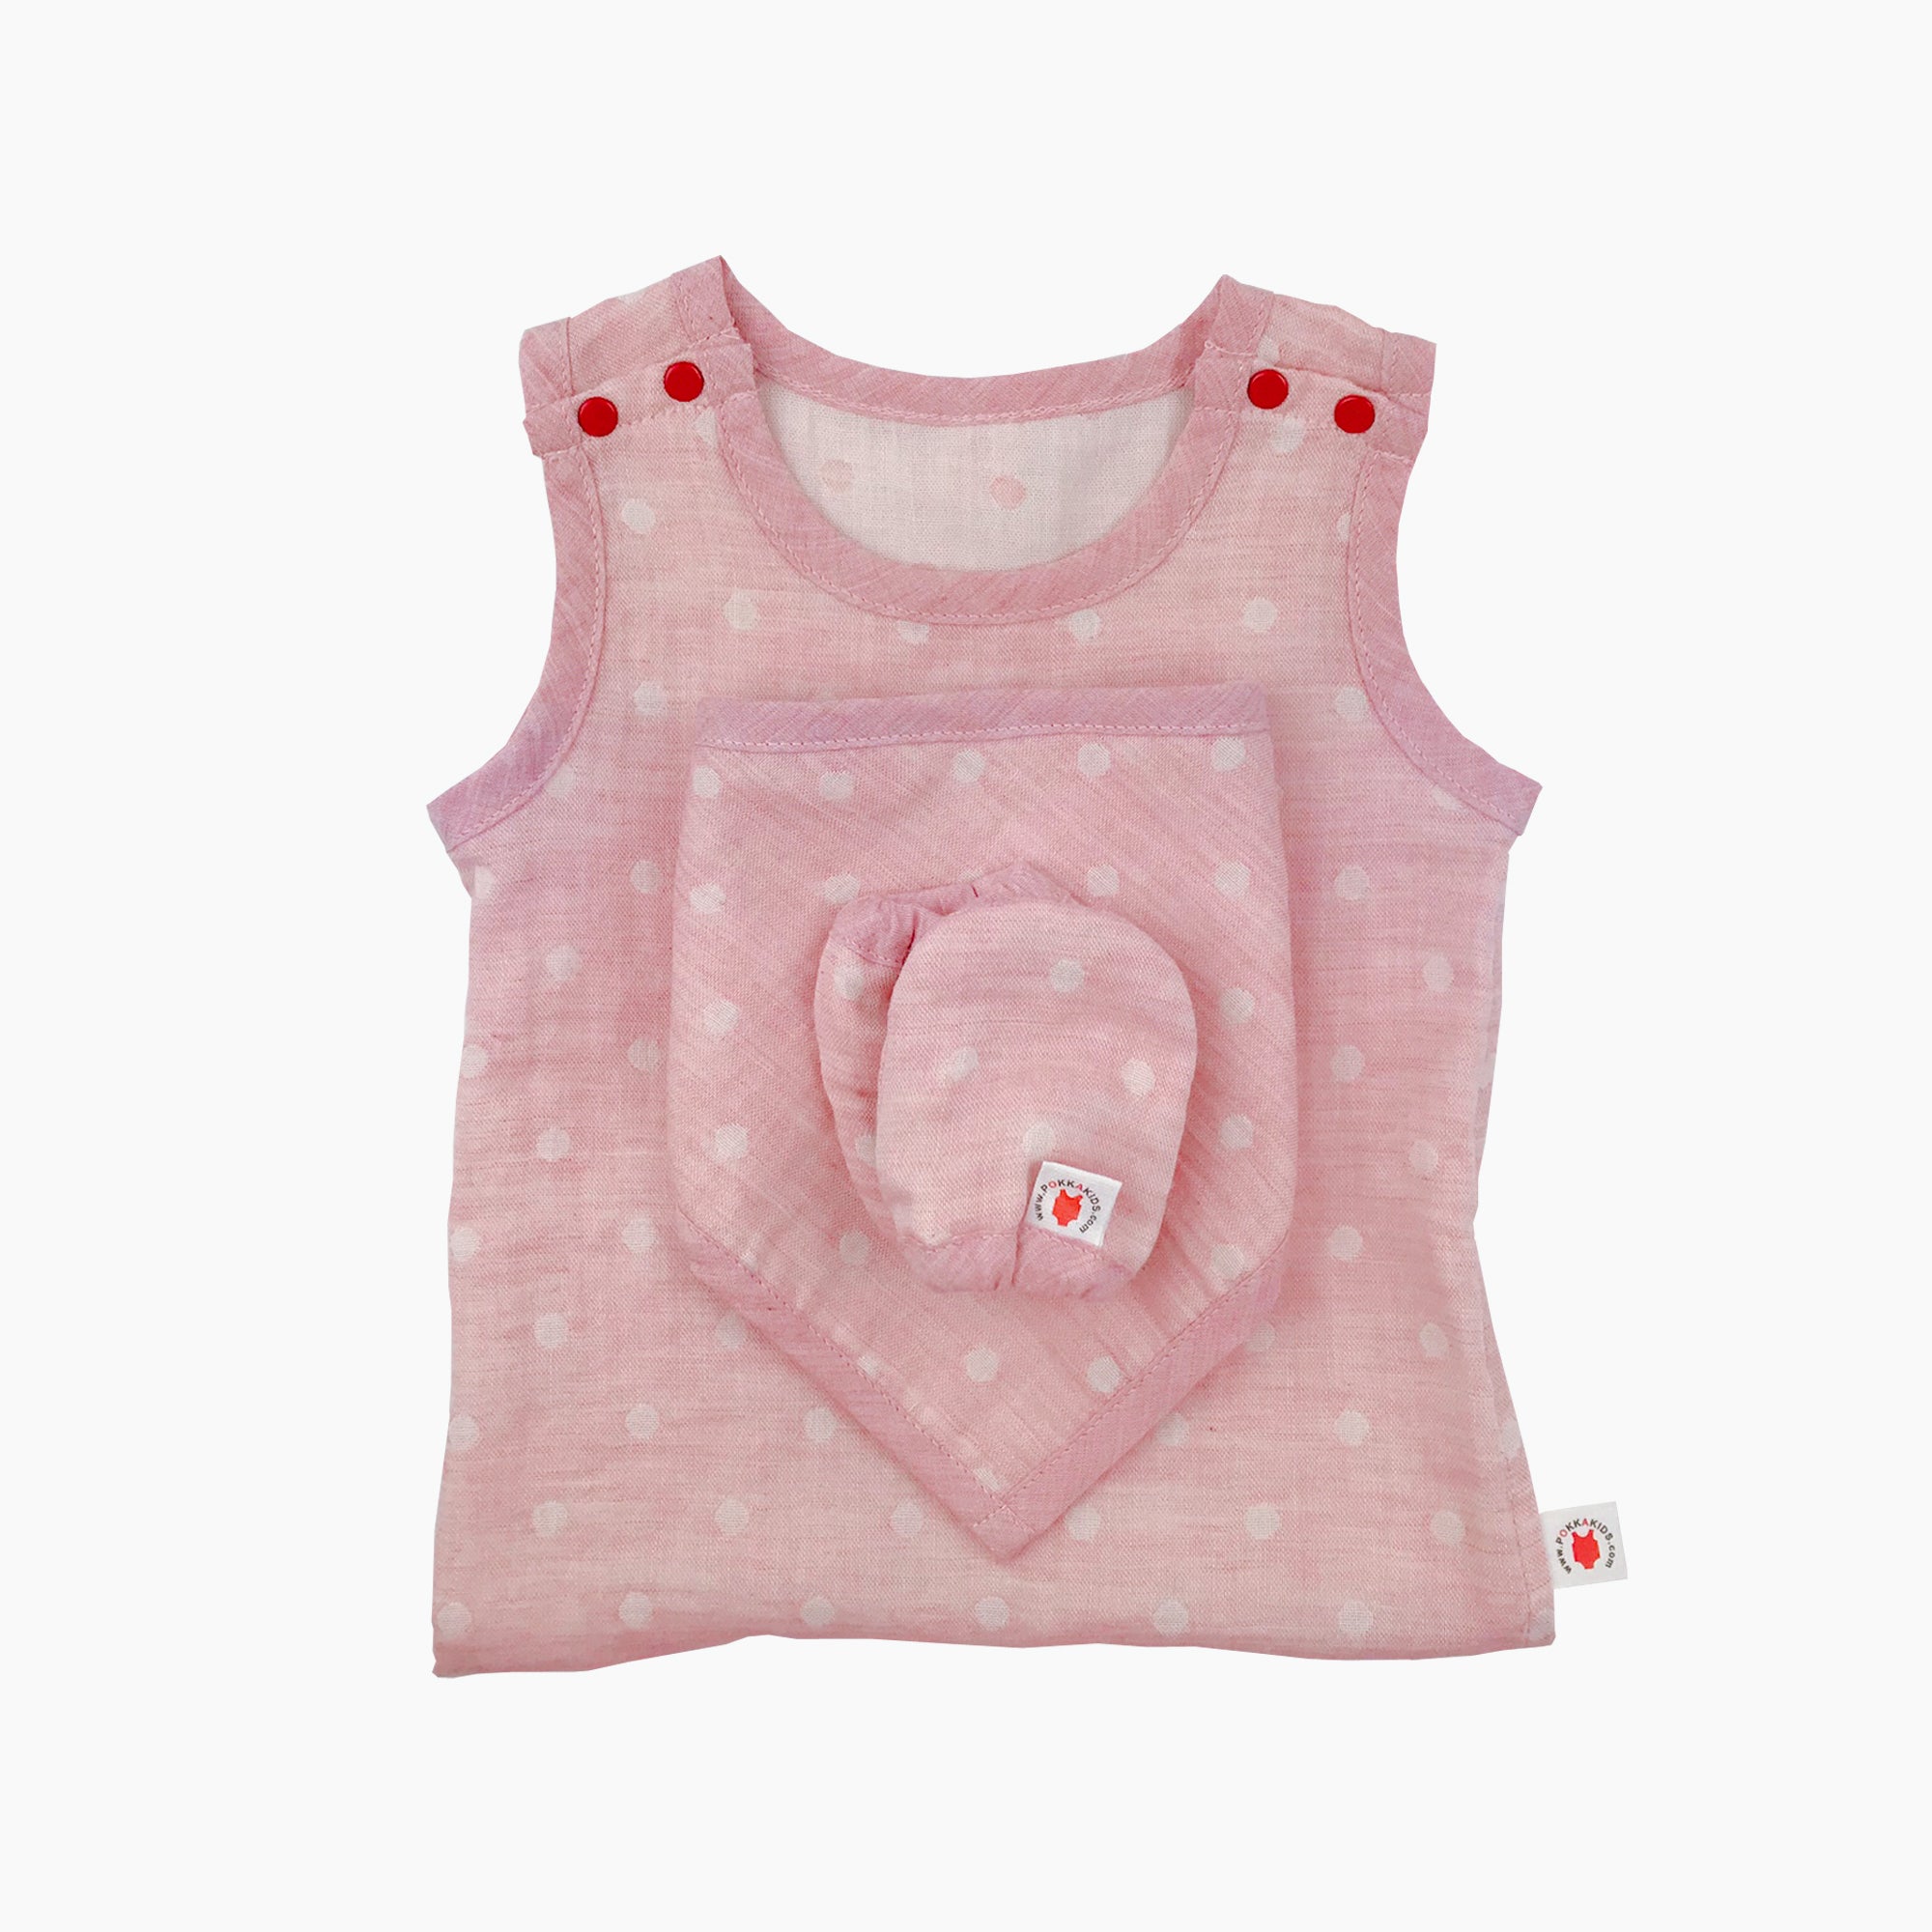 GOTS certified organic cotton baby gift includes bodysuit, bandana bib, and mittens for eczema in pink color